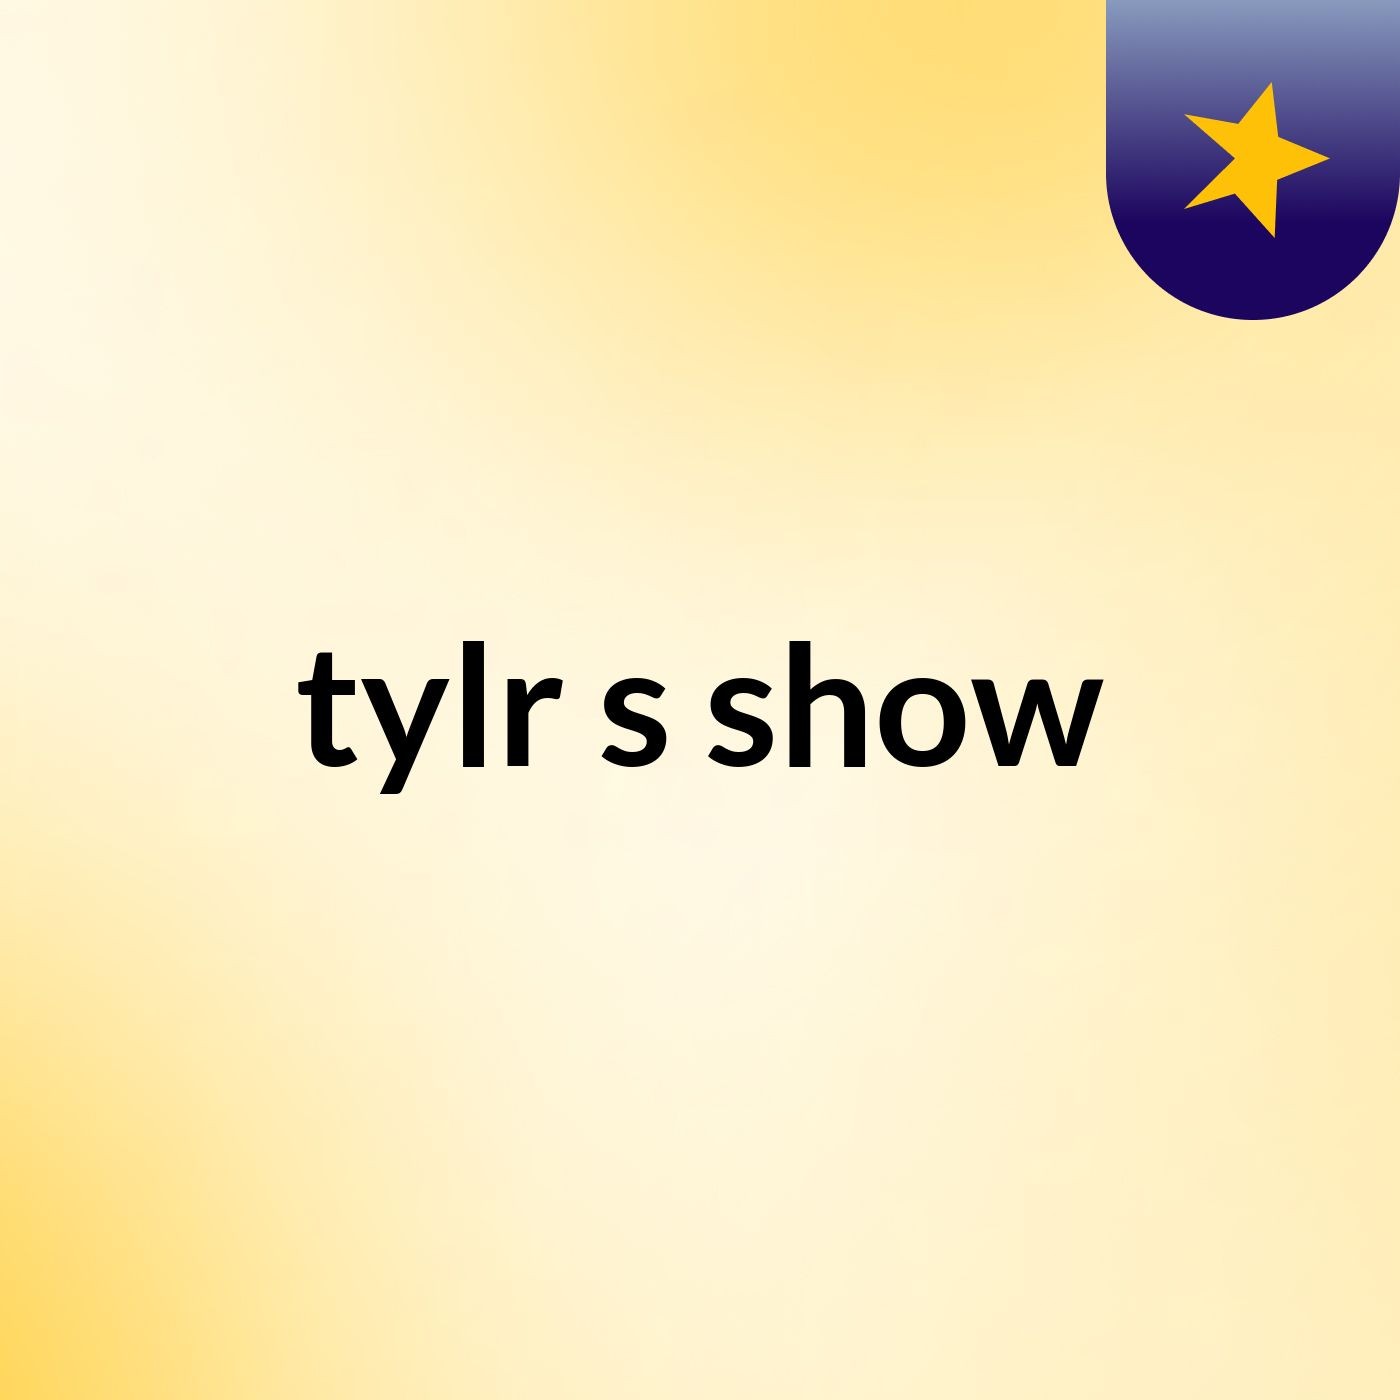 tylr's show